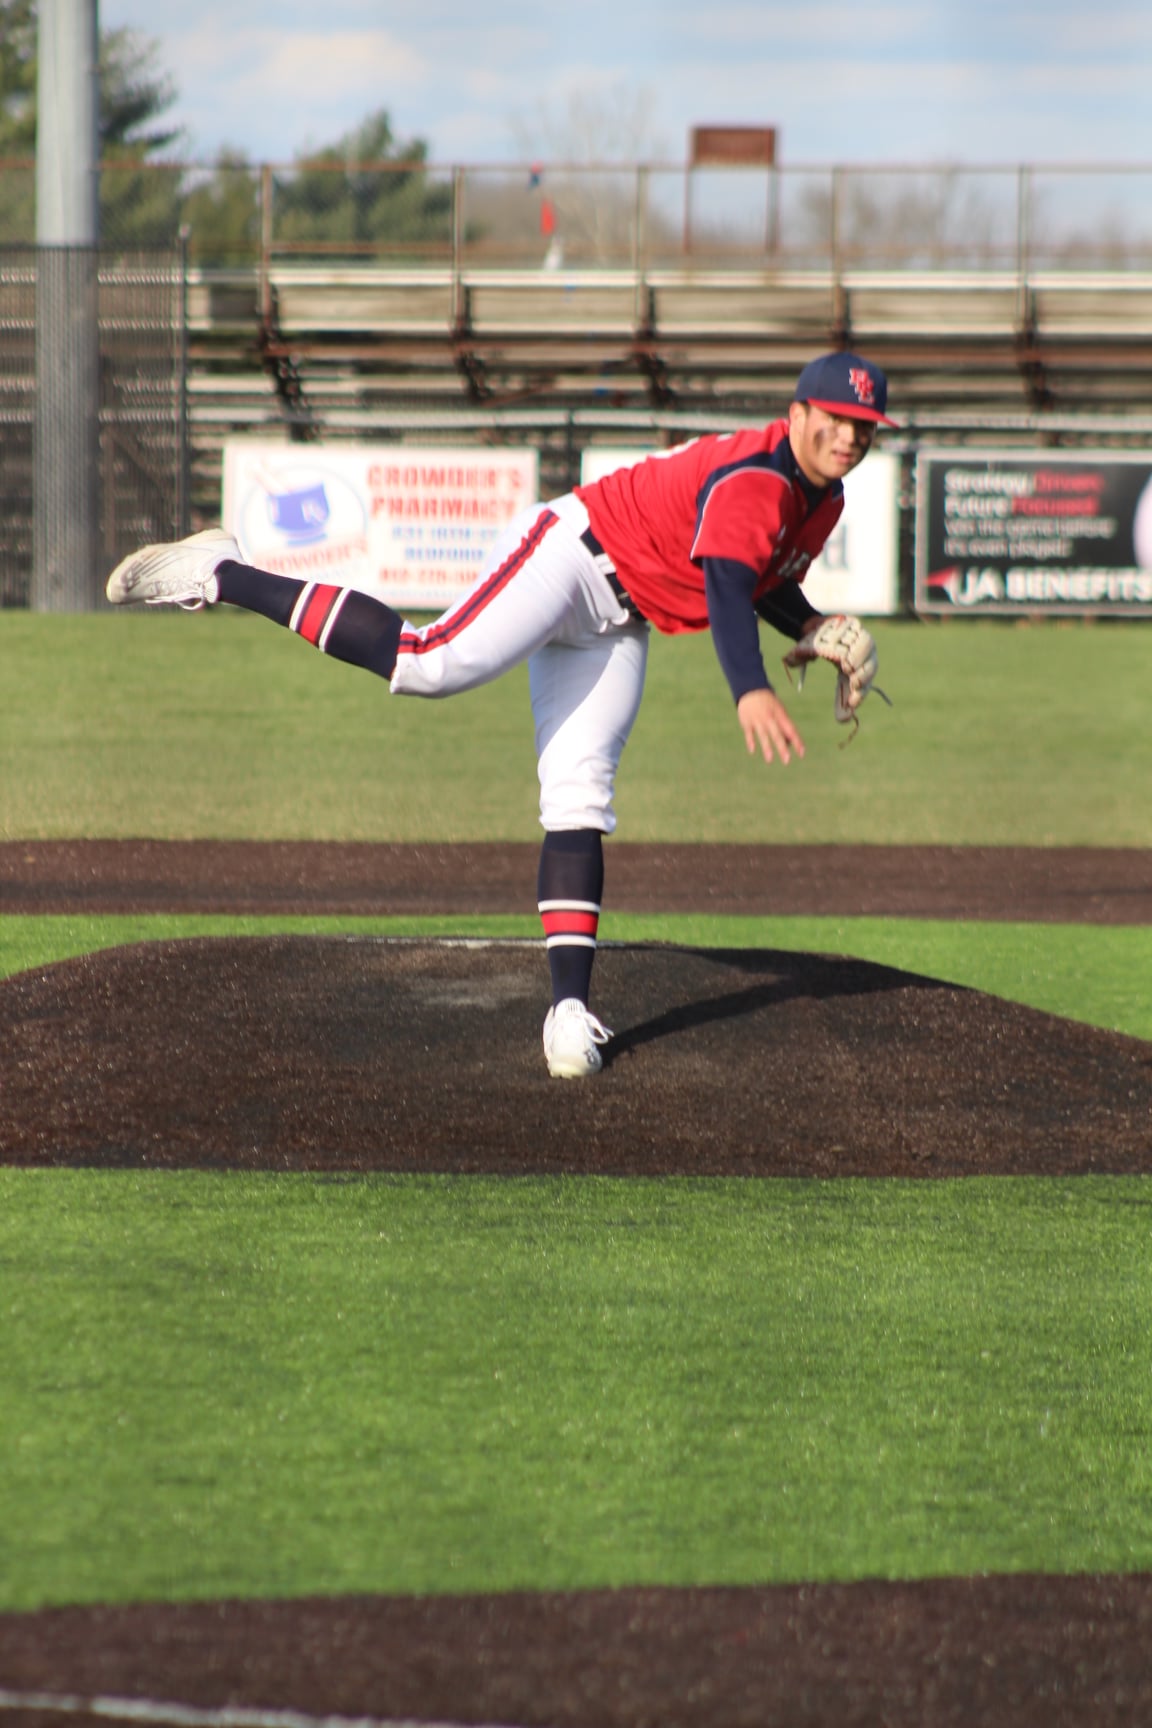 BNL’s Kline Woodward struck out 5 against Austin on Monday as the Stars edged the Eagles 5-4 with a late rally